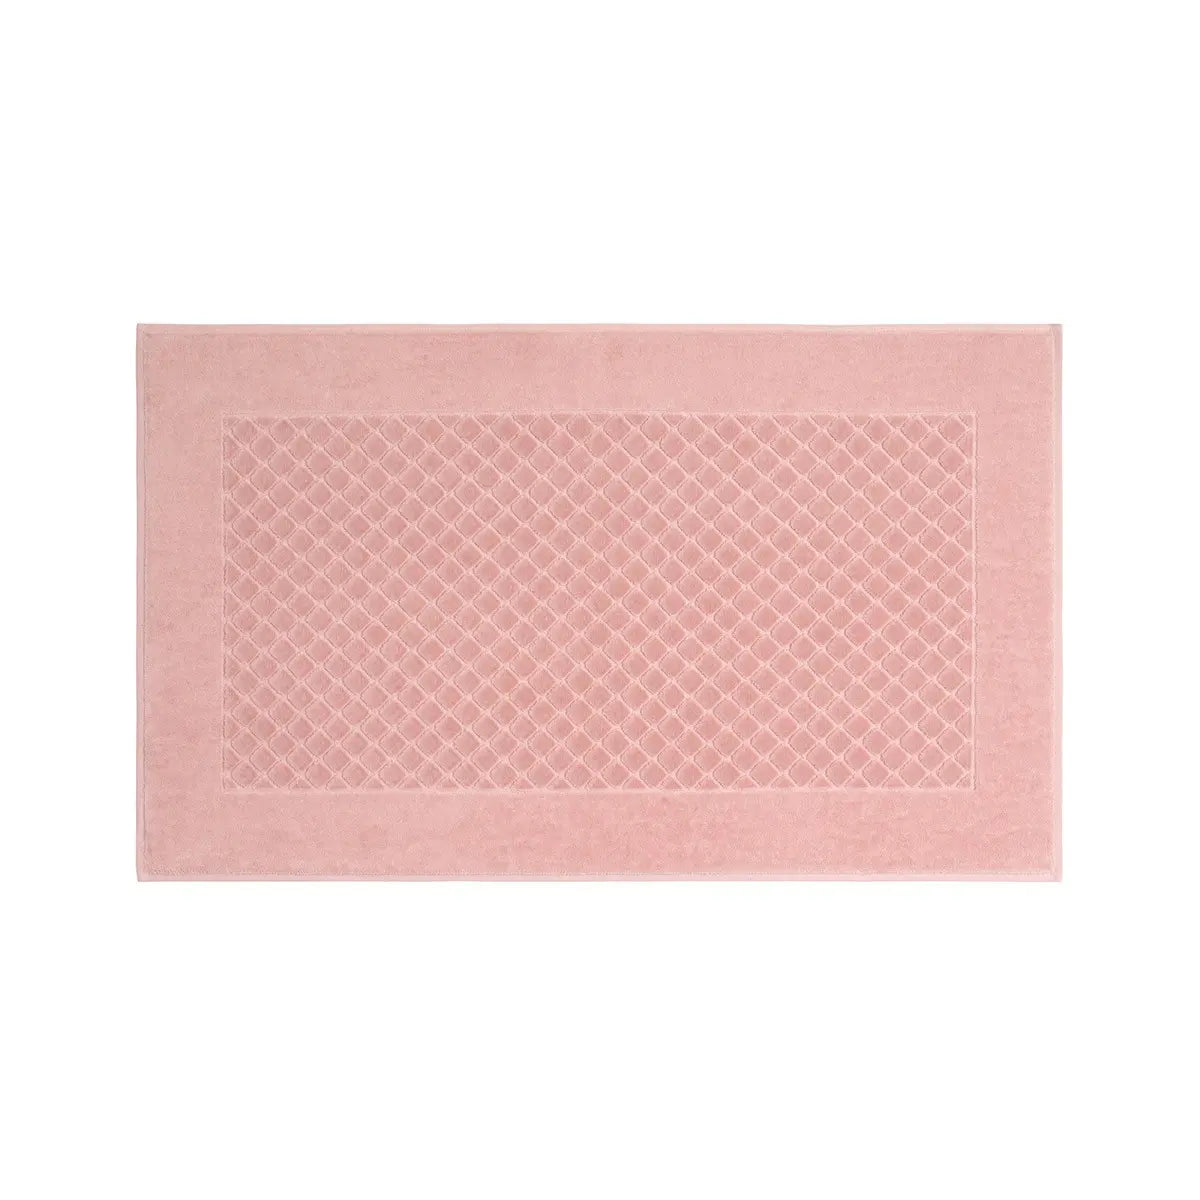 Yves Delorme Etoile Bath Mat in The